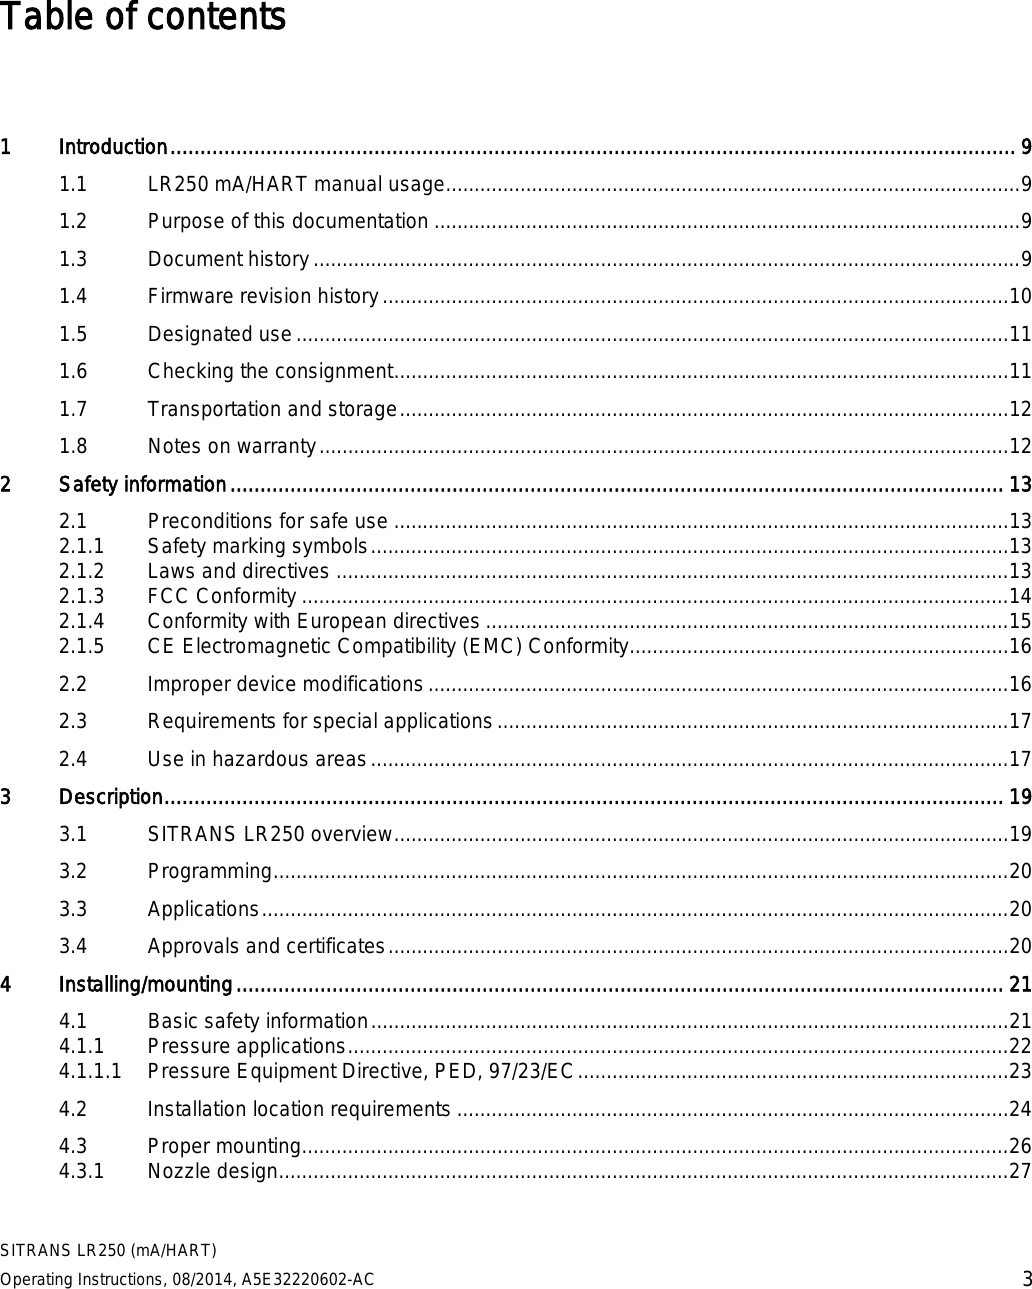  SITRANS LR250 (mA/HART) Operating Instructions, 08/2014, A5E32220602-AC 3 Table of contents   1  Introduction ............................................................................................................................................. 9 1.1 LR250 mA/HART manual usage.................................................................................................... 9 1.2 Purpose of this documentation ...................................................................................................... 9 1.3 Document history ........................................................................................................................... 9 1.4 Firmware revision history ............................................................................................................. 10 1.5 Designated use ............................................................................................................................ 11 1.6 Checking the consignment ........................................................................................................... 11 1.7 Transportation and storage .......................................................................................................... 12 1.8 Notes on warranty ........................................................................................................................ 12 2  Safety information ................................................................................................................................. 13 2.1 Preconditions for safe use ........................................................................................................... 13 2.1.1 Safety marking symbols ............................................................................................................... 13 2.1.2 Laws and directives ..................................................................................................................... 13 2.1.3 FCC Conformity ........................................................................................................................... 14 2.1.4 Conformity with European directives ........................................................................................... 15 2.1.5 CE Electromagnetic Compatibility (EMC) Conformity.................................................................. 16 2.2 Improper device modifications ..................................................................................................... 16 2.3 Requirements for special applications ......................................................................................... 17 2.4 Use in hazardous areas ............................................................................................................... 17 3  Description ............................................................................................................................................ 19 3.1 SITRANS LR250 overview ........................................................................................................... 19 3.2 Programming ................................................................................................................................ 20 3.3 Applications .................................................................................................................................. 20 3.4 Approvals and certificates ............................................................................................................ 20 4  Installing/mounting ................................................................................................................................ 21 4.1 Basic safety information ............................................................................................................... 21 4.1.1 Pressure applications ................................................................................................................... 22 4.1.1.1 Pressure Equipment Directive, PED, 97/23/EC ........................................................................... 23 4.2 Installation location requirements ................................................................................................ 24 4.3 Proper mounting........................................................................................................................... 26 4.3.1 Nozzle design ............................................................................................................................... 27 